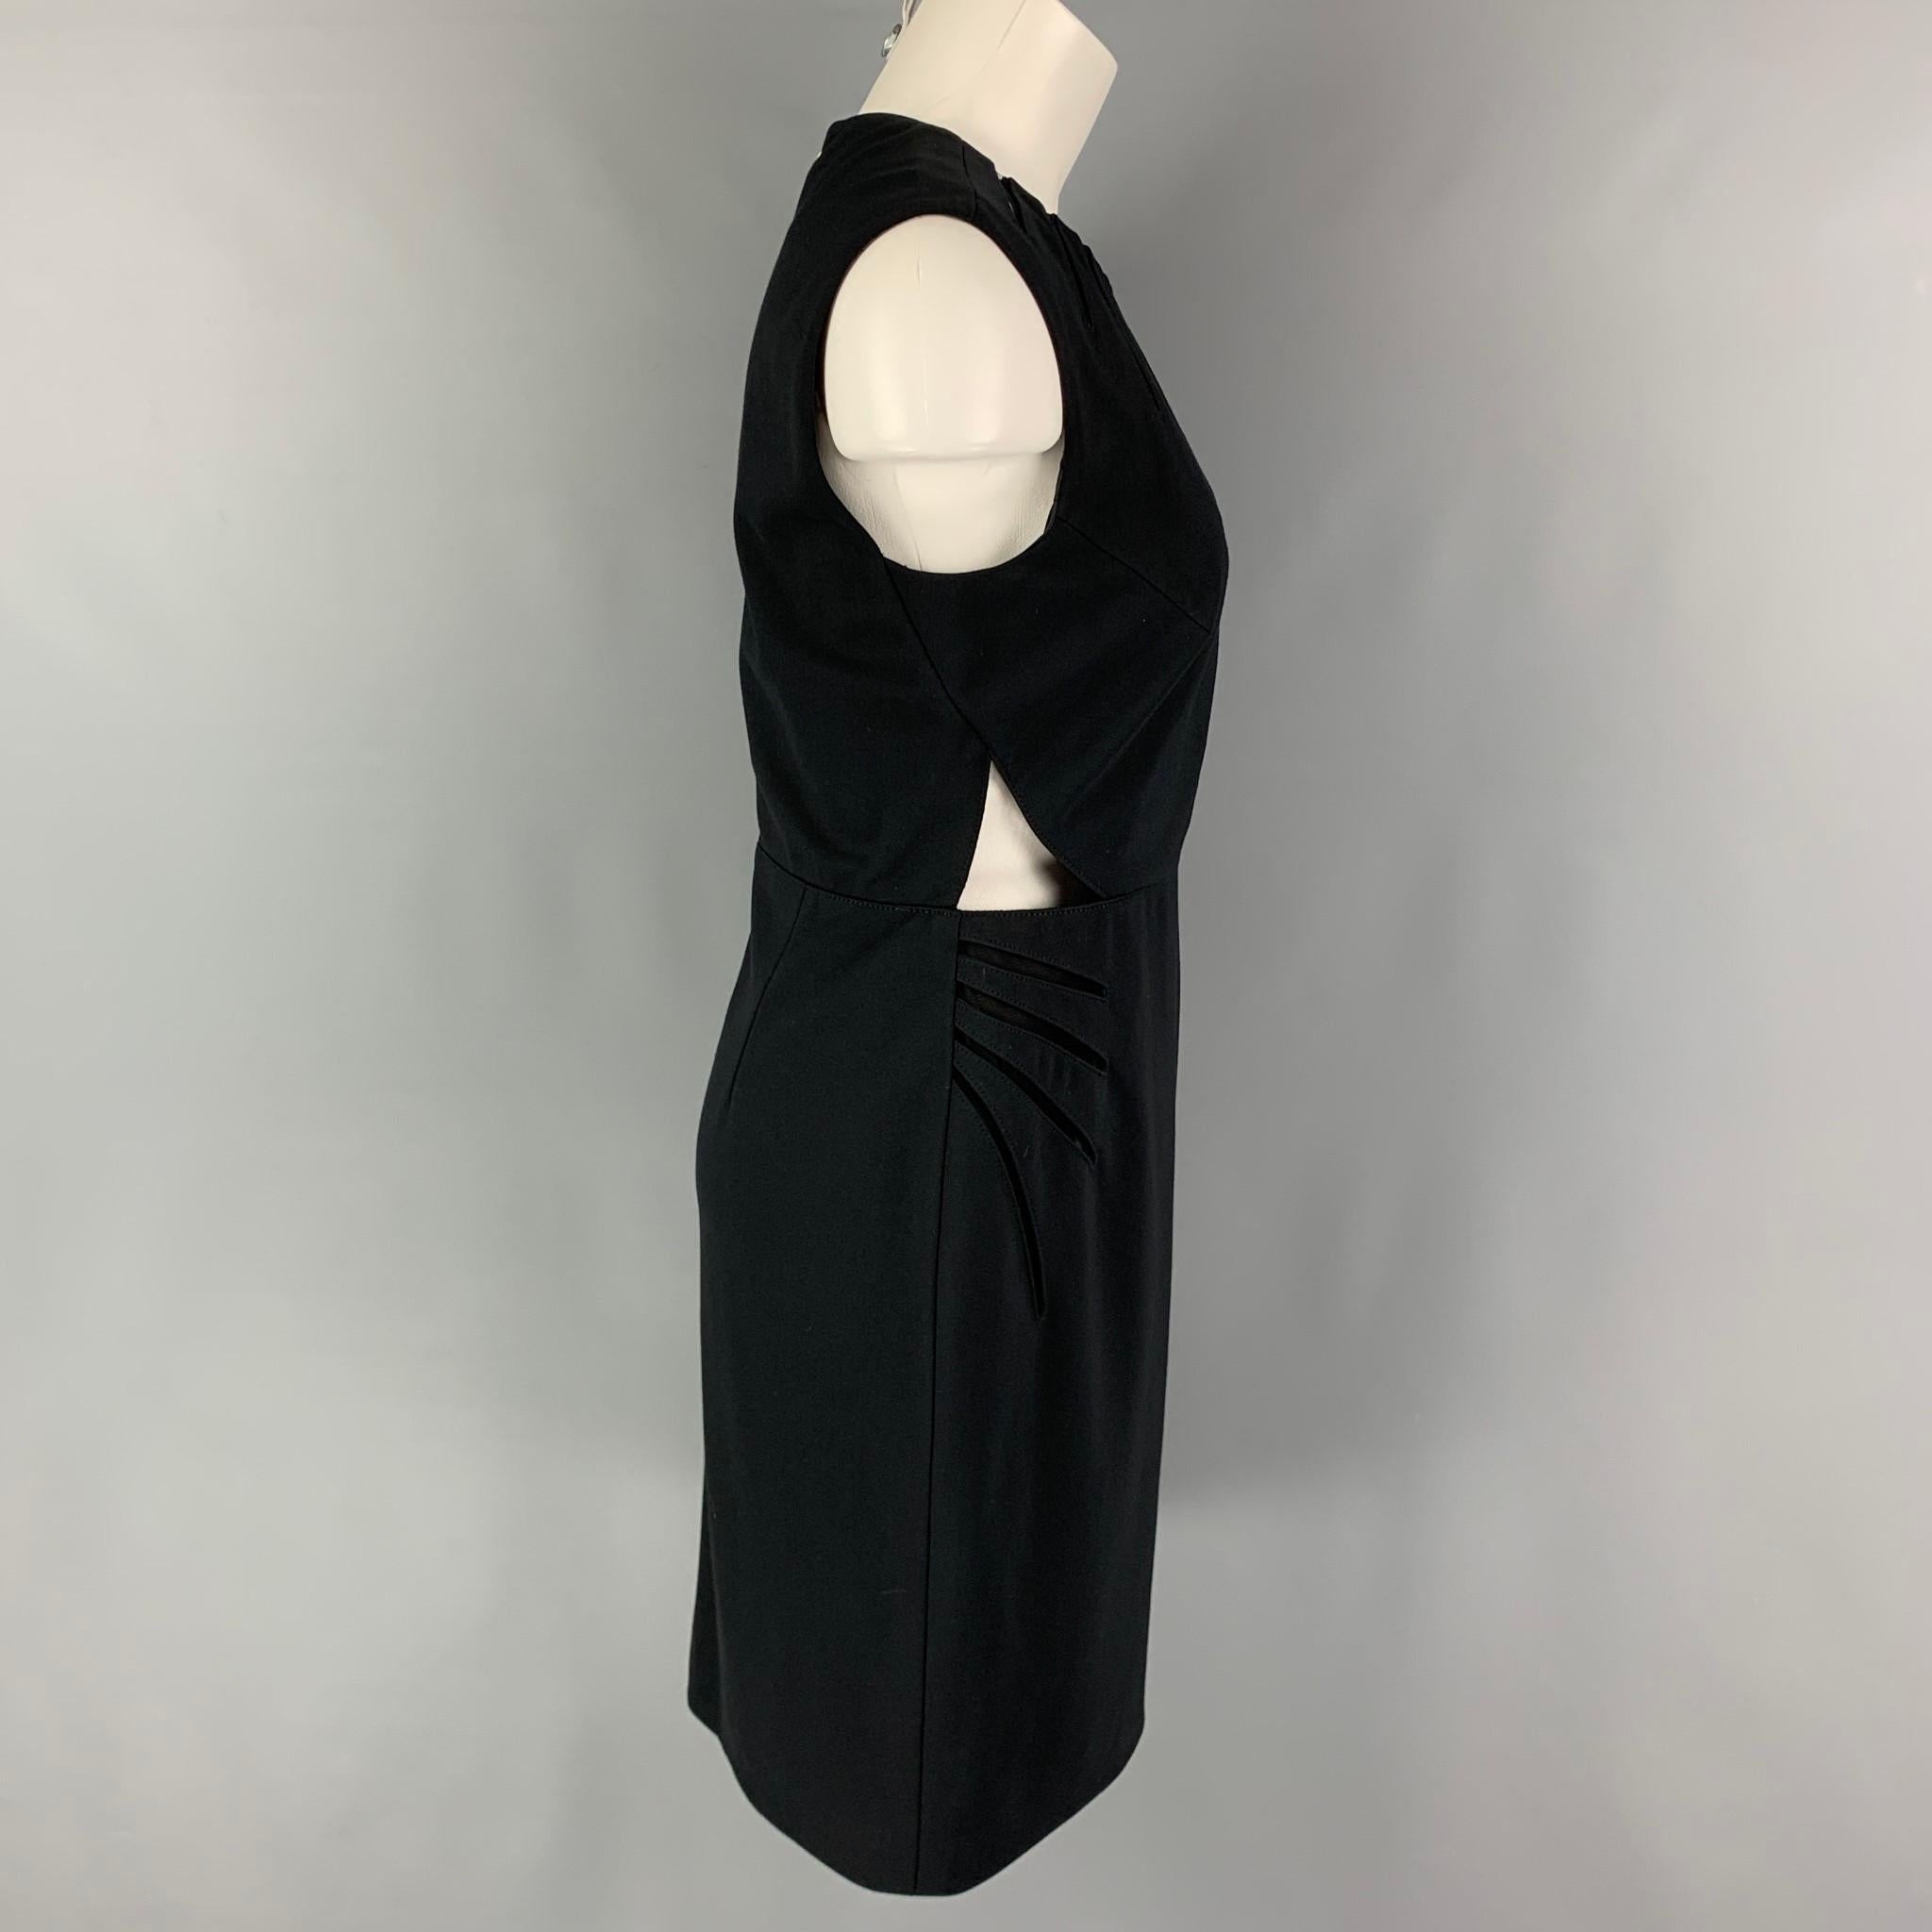 CATHERINE DEANE dress comes in a black rayon blend featuring cut-out designs, mesh panels, and a back zipper closure. 

Very Good Pre-Owned Condition.
Marked: K 12 / US 8 / EUR 40
Original Retail Price: $650.00

Measurements:

Shoulder: 16 in.
Bust: